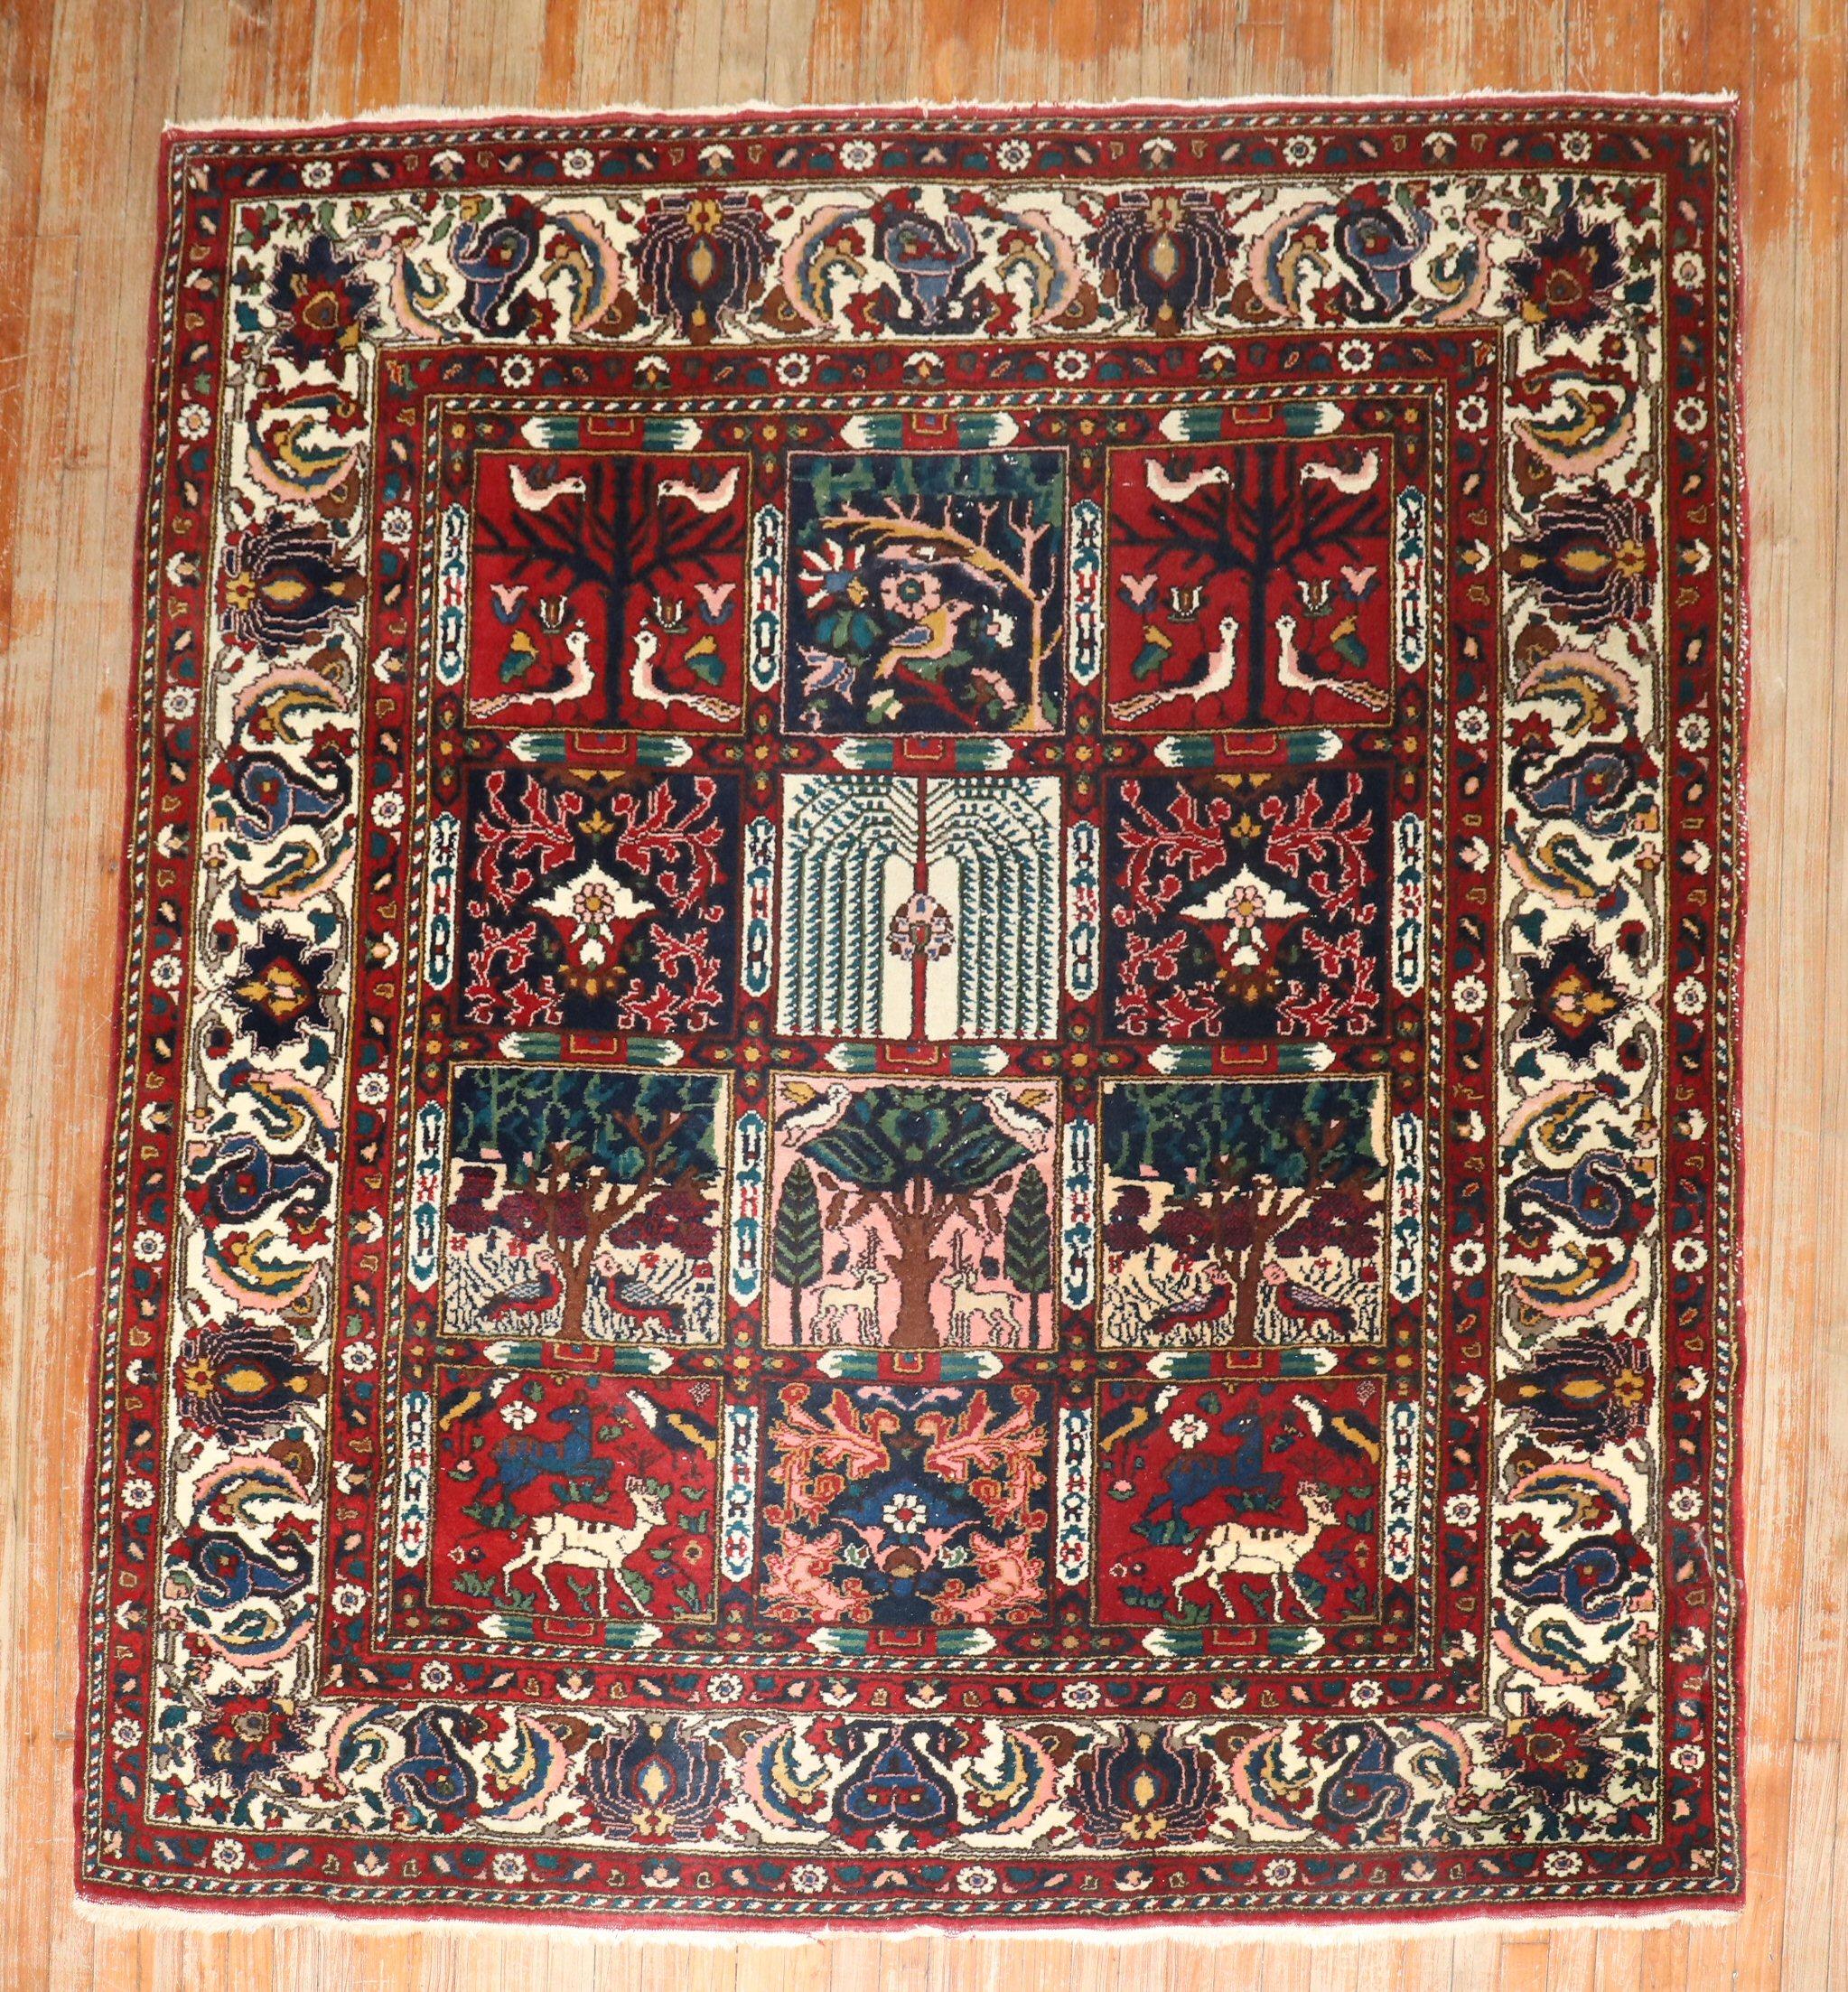 Square-size Persian Bakhtiari rug with an all-over garden box design from the 3rd quarter of the 20th century

Measures: 6'6'' x 6'11'' 